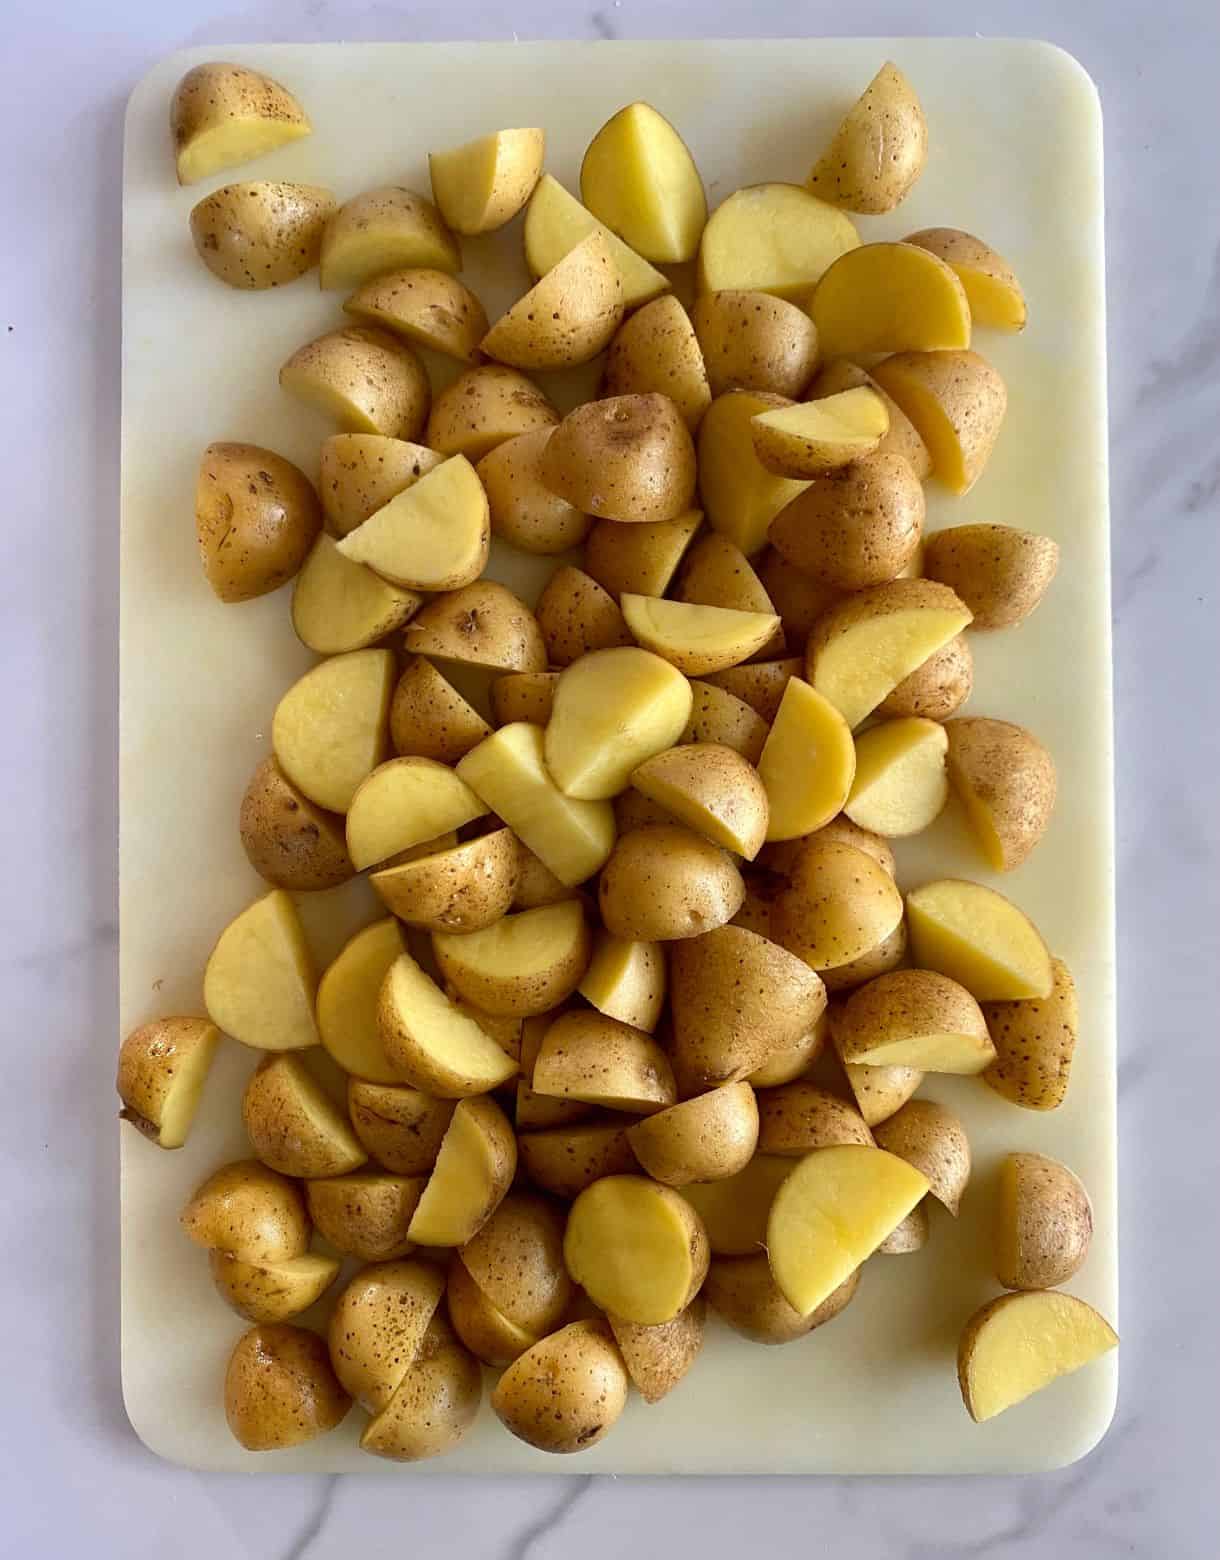 A cutting board with mini potatoes cut into bite-size pieces.